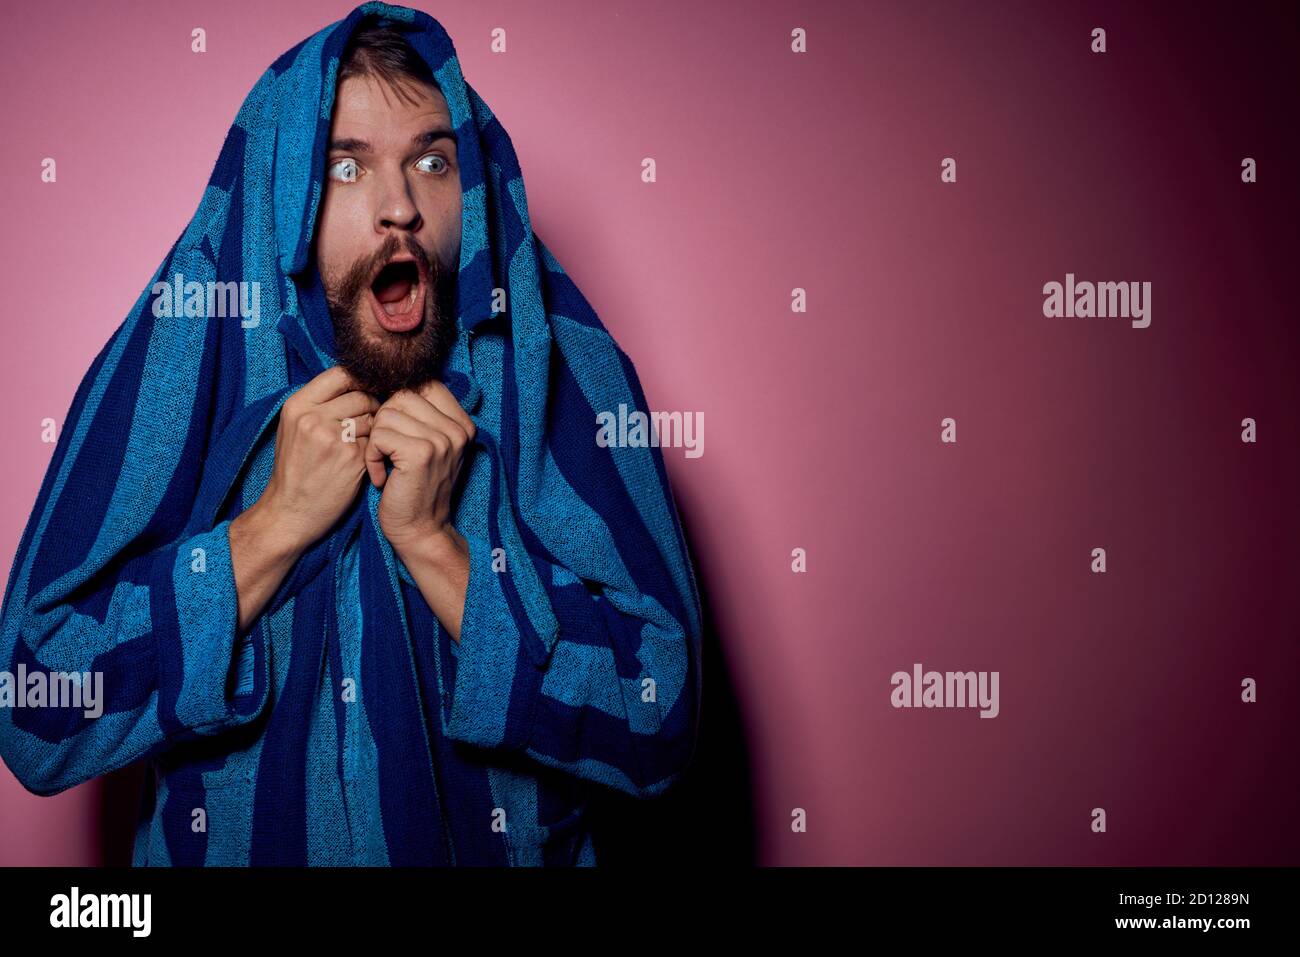 Bearded man in a blue striped robe on a pink background with hands emotions model portrait Stock Photo